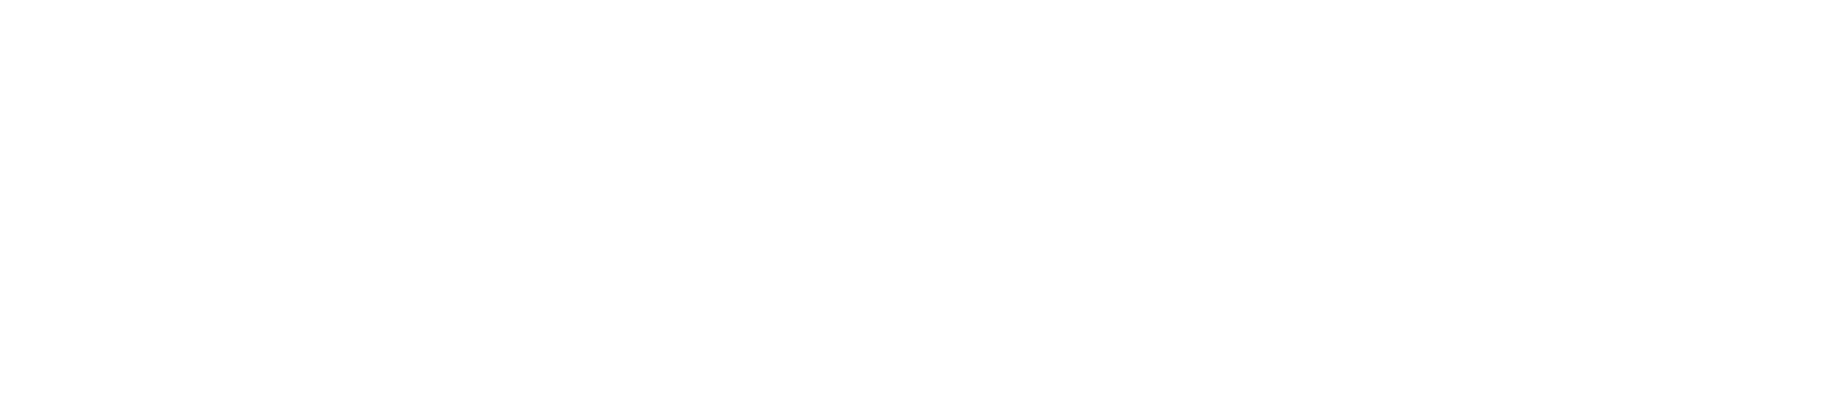 Bracalente Manufacturing Group since 1950